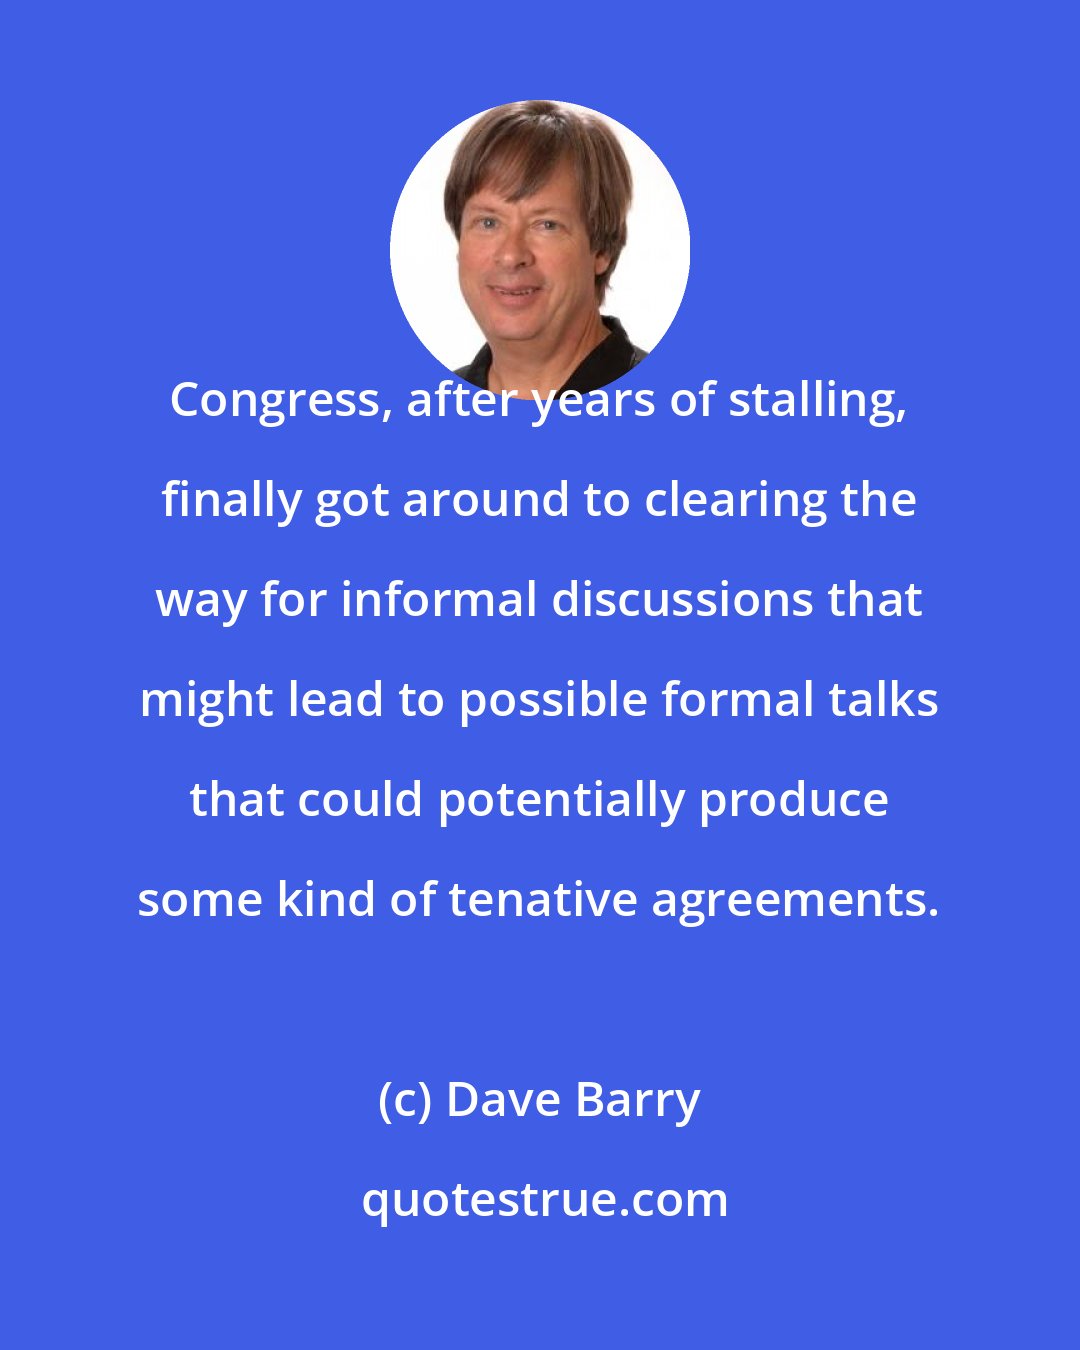 Dave Barry: Congress, after years of stalling, finally got around to clearing the way for informal discussions that might lead to possible formal talks that could potentially produce some kind of tenative agreements.